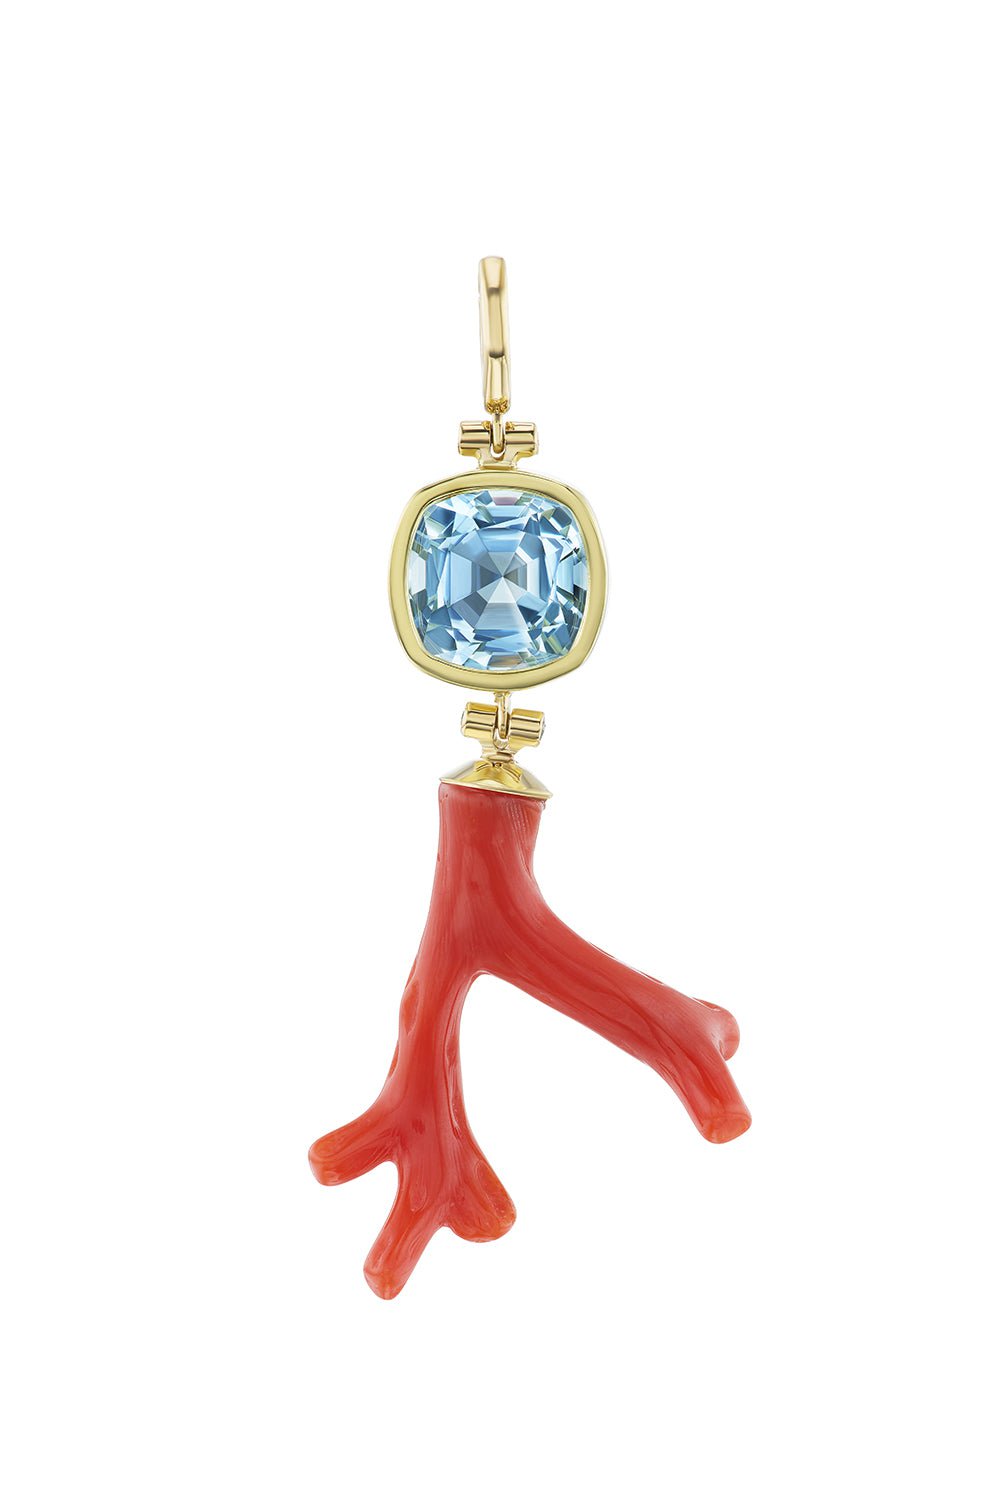 BECK JEWELS-Torre Del Greco Pendant-YELLOW GOLD